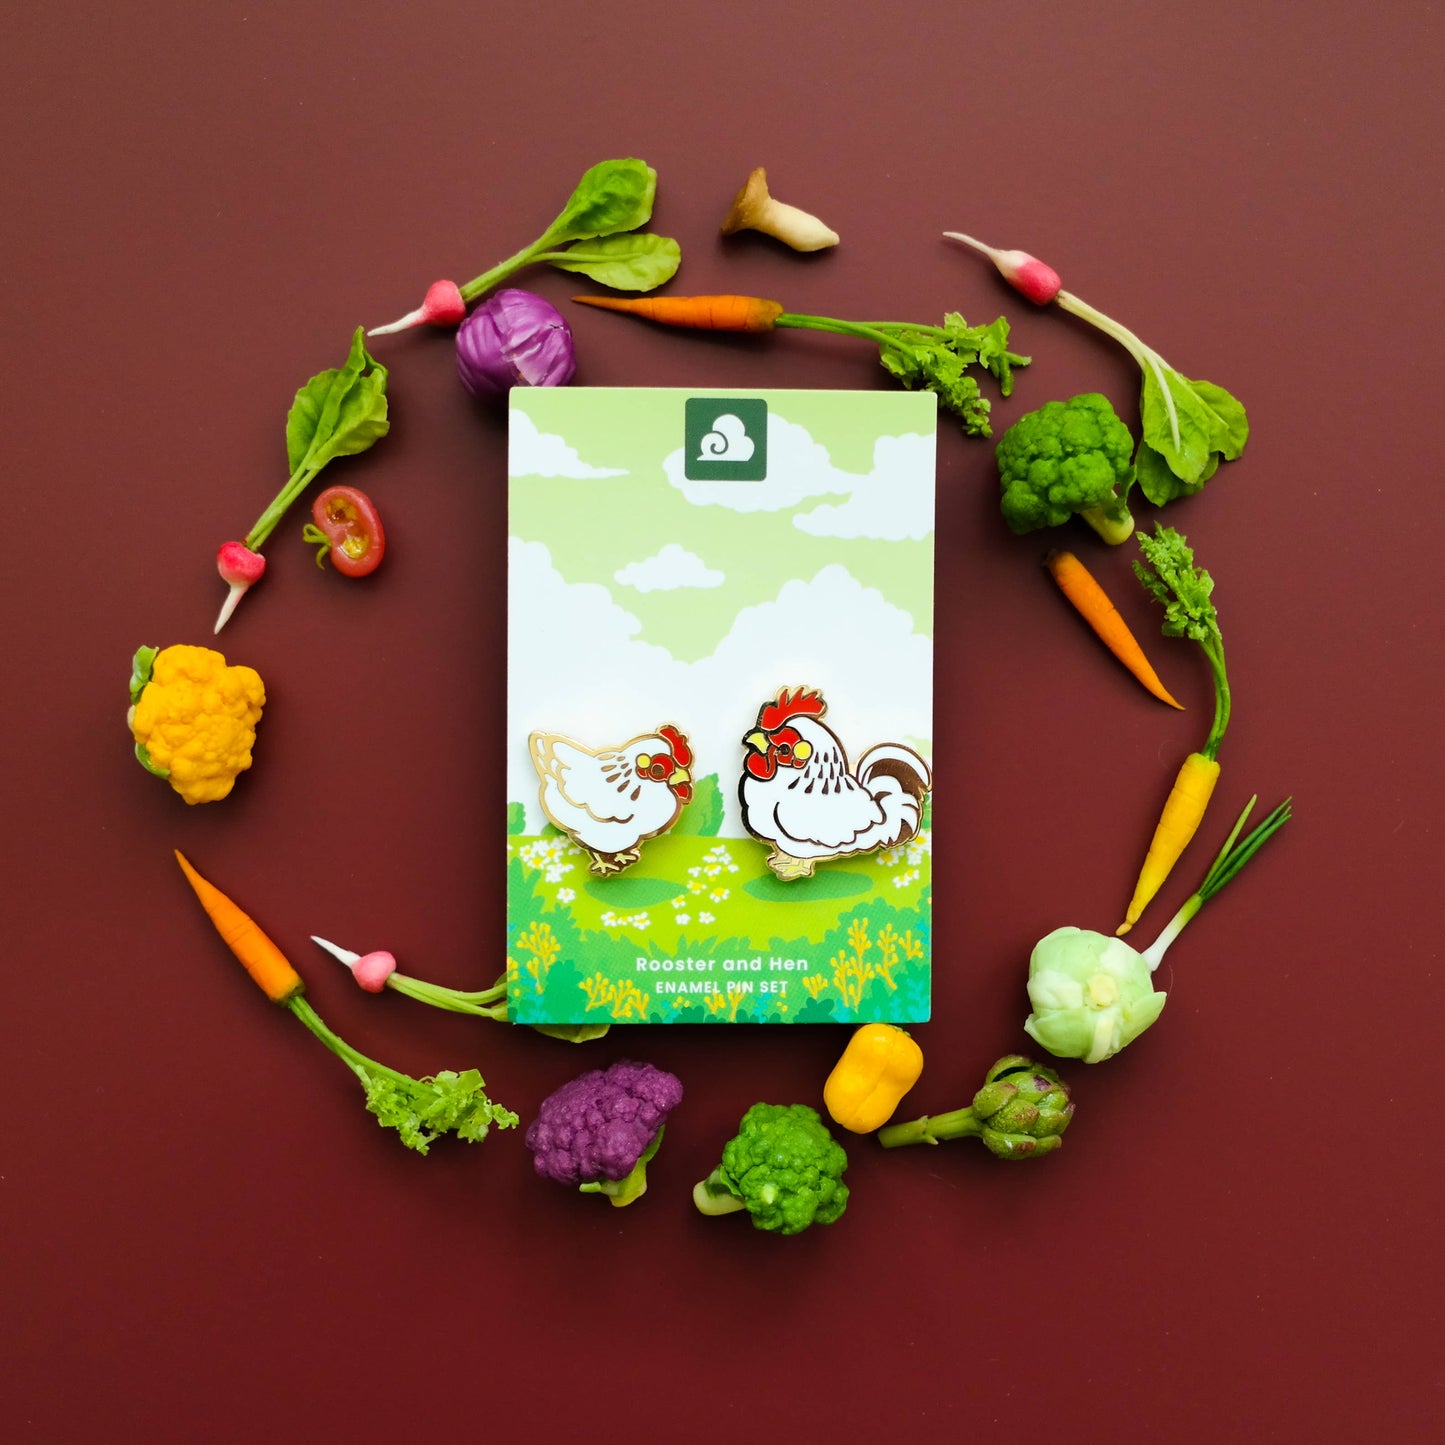 White Rooster and Hen Enamel Pin Set